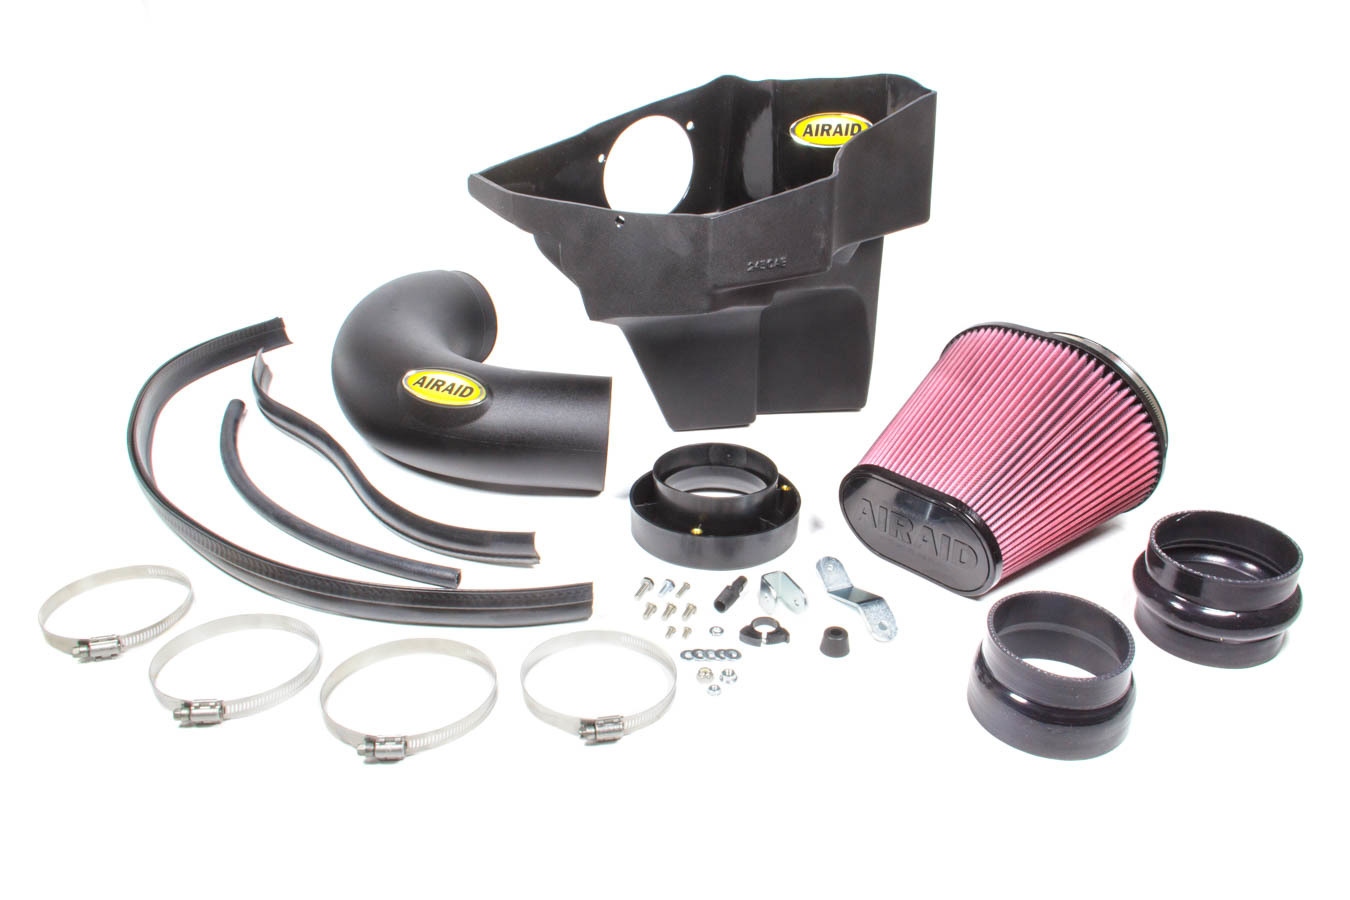 AIRAID Air Induction System, MXP, Reusable Oiled Filter, GM LS-Series, Chevy Camaro 2015, Kit